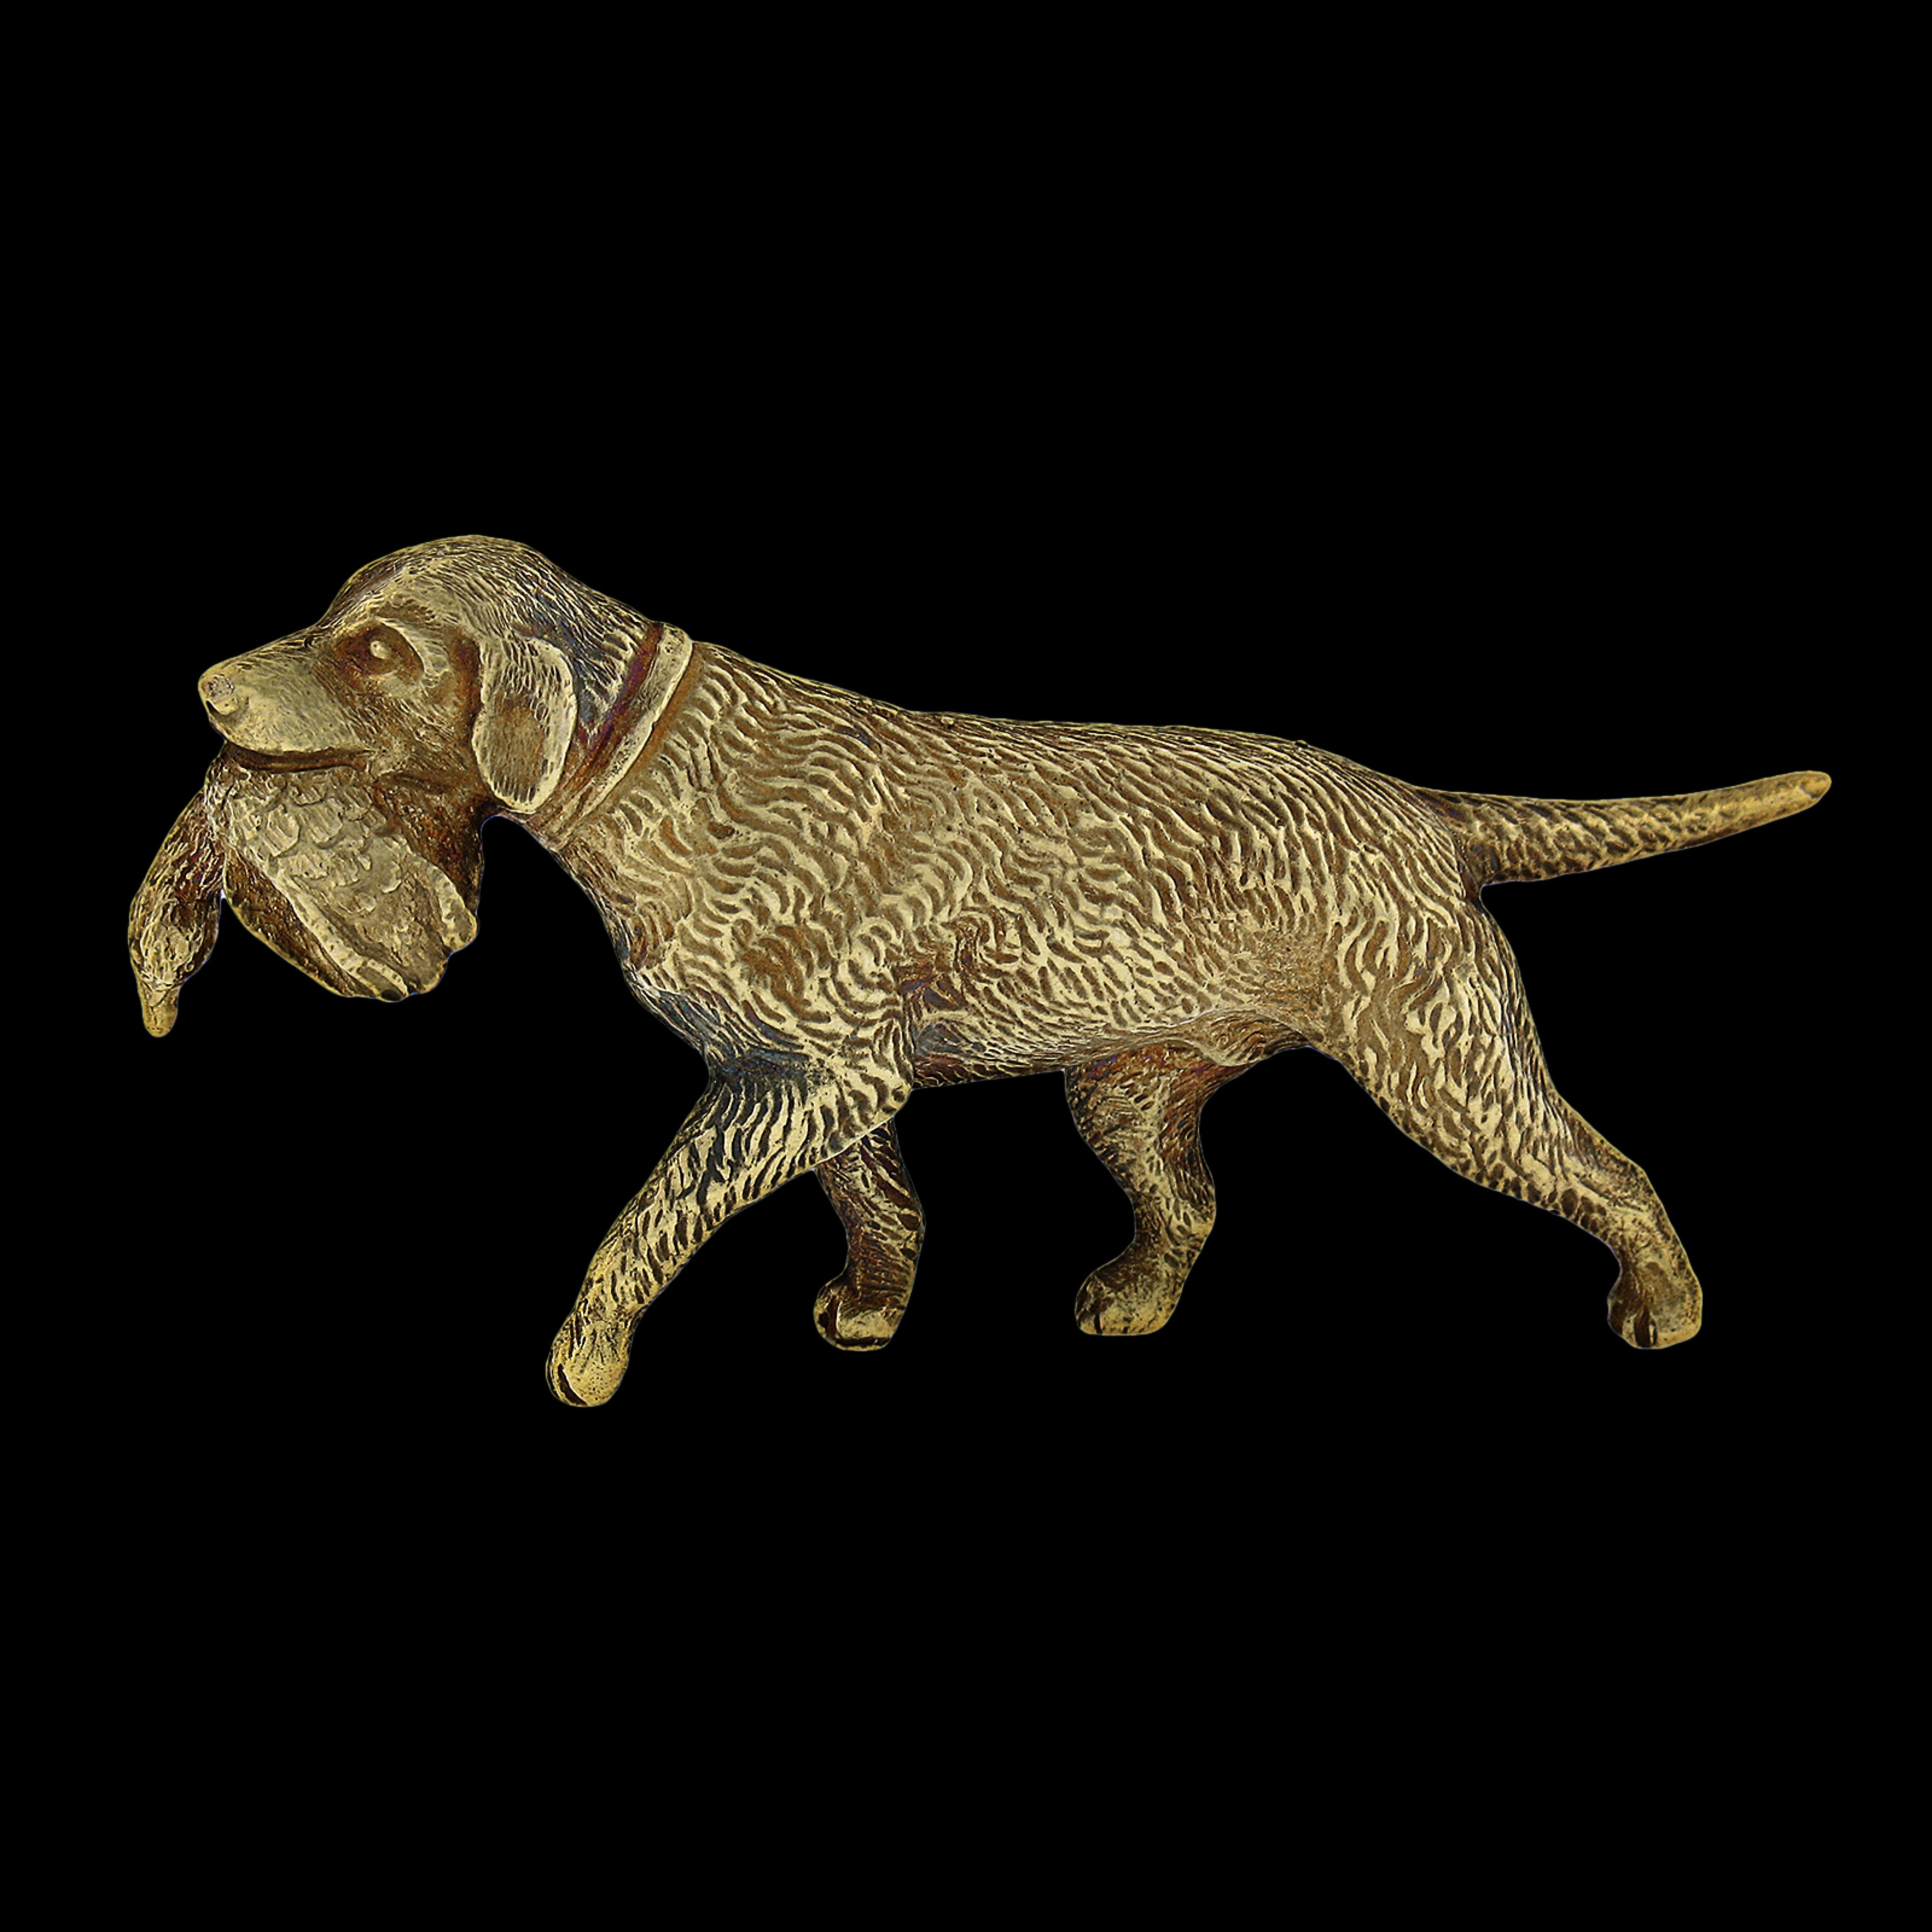 This incredible and very well made vintage pin/brooch is crafted in solid 18k yellow gold. It features a perfectly structured Chesapeake Bay Retriever dog design with a duck in its mouth, showing remarkably outstanding workmanship and texture that